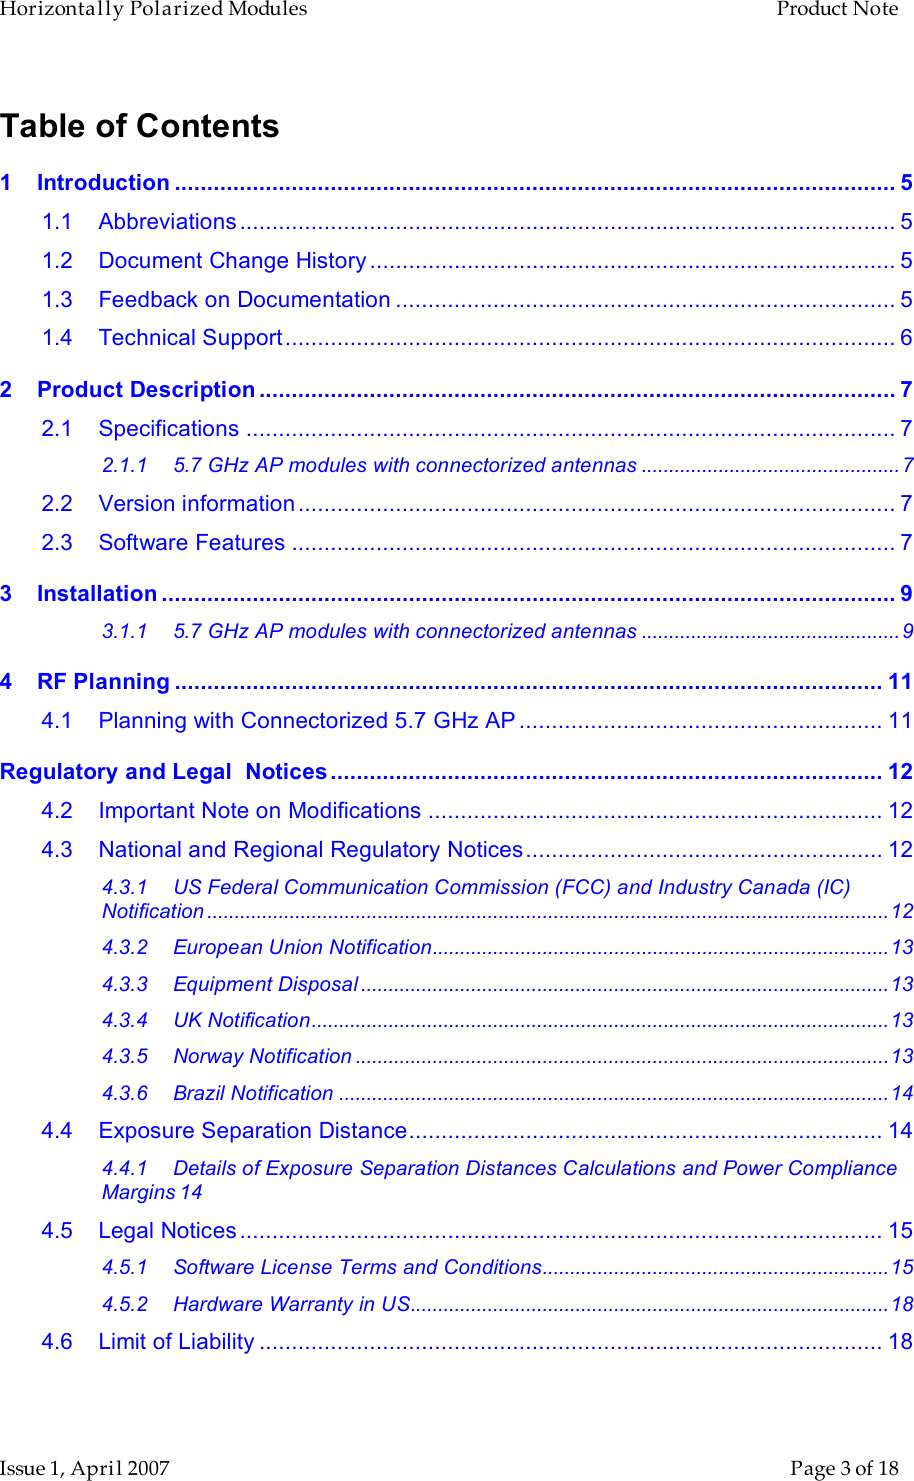 Horizontally Polarized Modules    Product Note   Issue 1, April 2007      Page 3 of 18 Table of Contents 1 Introduction ............................................................................................................... 5 1.1 Abbreviations..................................................................................................... 5 1.2 Document Change History................................................................................. 5 1.3 Feedback on Documentation ............................................................................. 5 1.4 Technical Support.............................................................................................. 6 2 Product Description .................................................................................................. 7 2.1 Specifications .................................................................................................... 7 2.1.1 5.7 GHz AP modules with connectorized antennas ...............................................7 2.2 Version information............................................................................................ 7 2.3 Software Features ............................................................................................. 7 3 Installation ................................................................................................................. 9 3.1.1 5.7 GHz AP modules with connectorized antennas ...............................................9 4 RF Planning ............................................................................................................. 11 4.1 Planning with Connectorized 5.7 GHz AP ........................................................ 11 Regulatory and Legal  Notices ..................................................................................... 12 4.2 Important Note on Modifications ...................................................................... 12 4.3 National and Regional Regulatory Notices....................................................... 12 4.3.1 US Federal Communication Commission (FCC) and Industry Canada (IC) Notification ............................................................................................................................12 4.3.2 European Union Notification...................................................................................13 4.3.3 Equipment Disposal ................................................................................................13 4.3.4 UK Notification.........................................................................................................13 4.3.5 Norway Notification .................................................................................................13 4.3.6 Brazil Notification ....................................................................................................14 4.4 Exposure Separation Distance......................................................................... 14 4.4.1 Details of Exposure Separation Distances Calculations and Power Compliance Margins 14 4.5 Legal Notices................................................................................................... 15 4.5.1 Software License Terms and Conditions...............................................................15 4.5.2 Hardware Warranty in US.......................................................................................18 4.6 Limit of Liability ................................................................................................ 18  